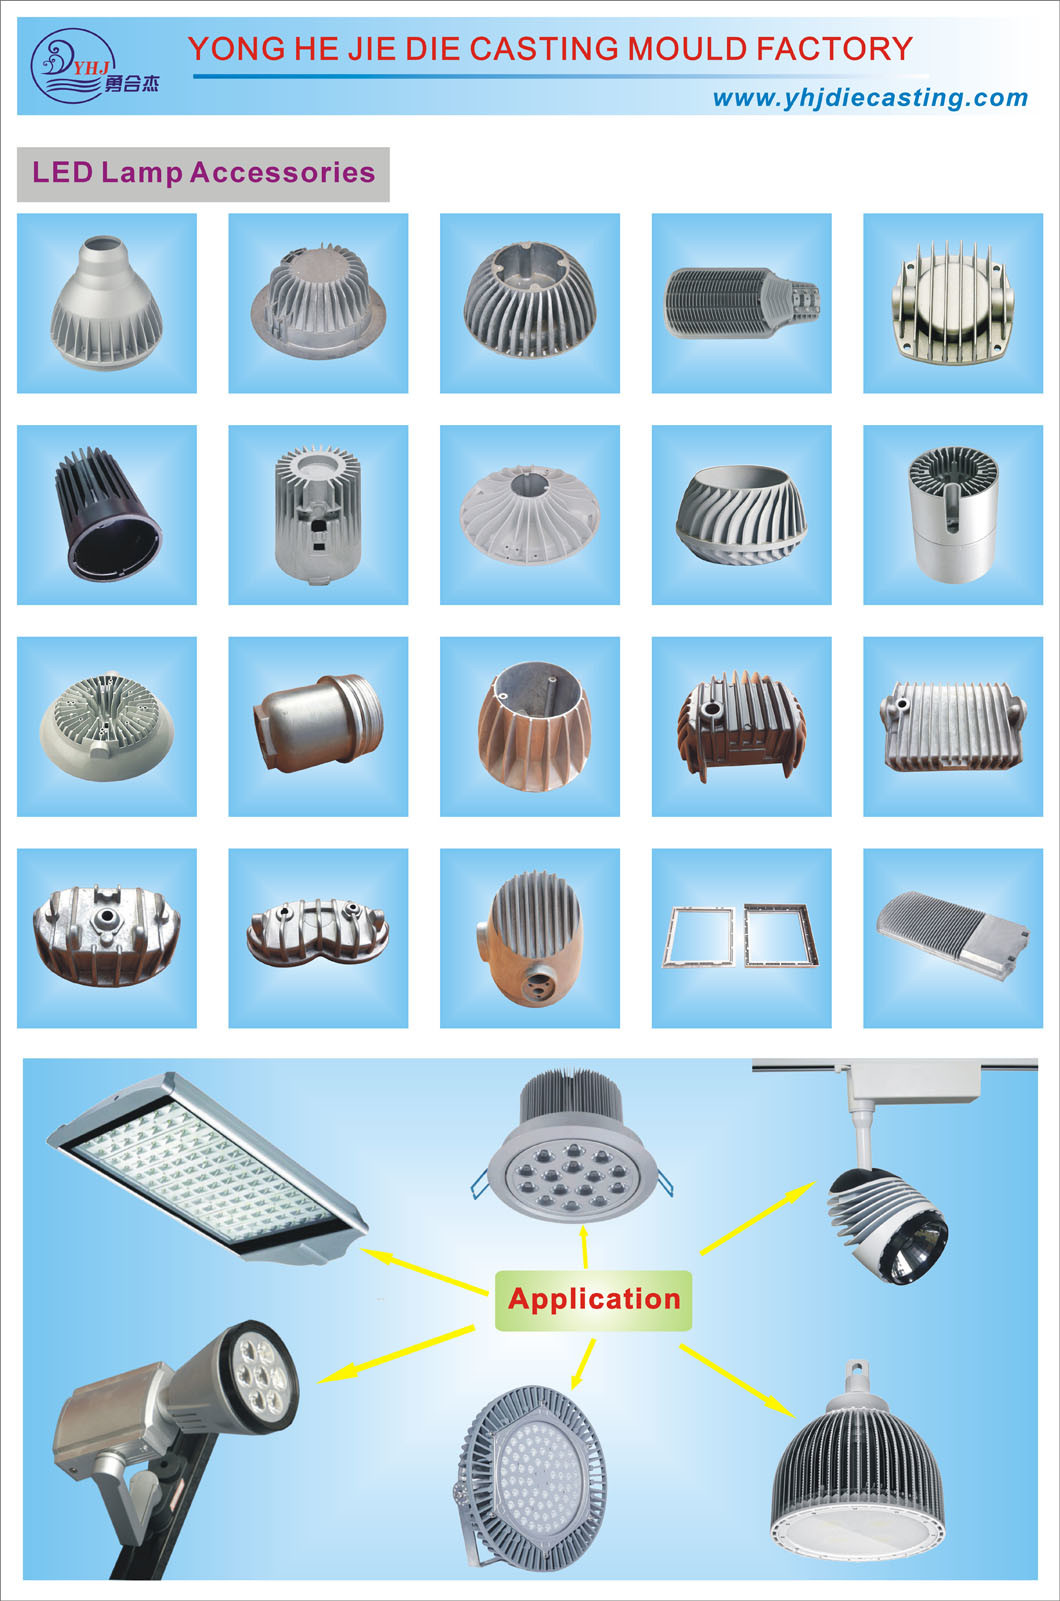 Professional OEM Aluminum Die Casting Spare Parts with Big Size in China